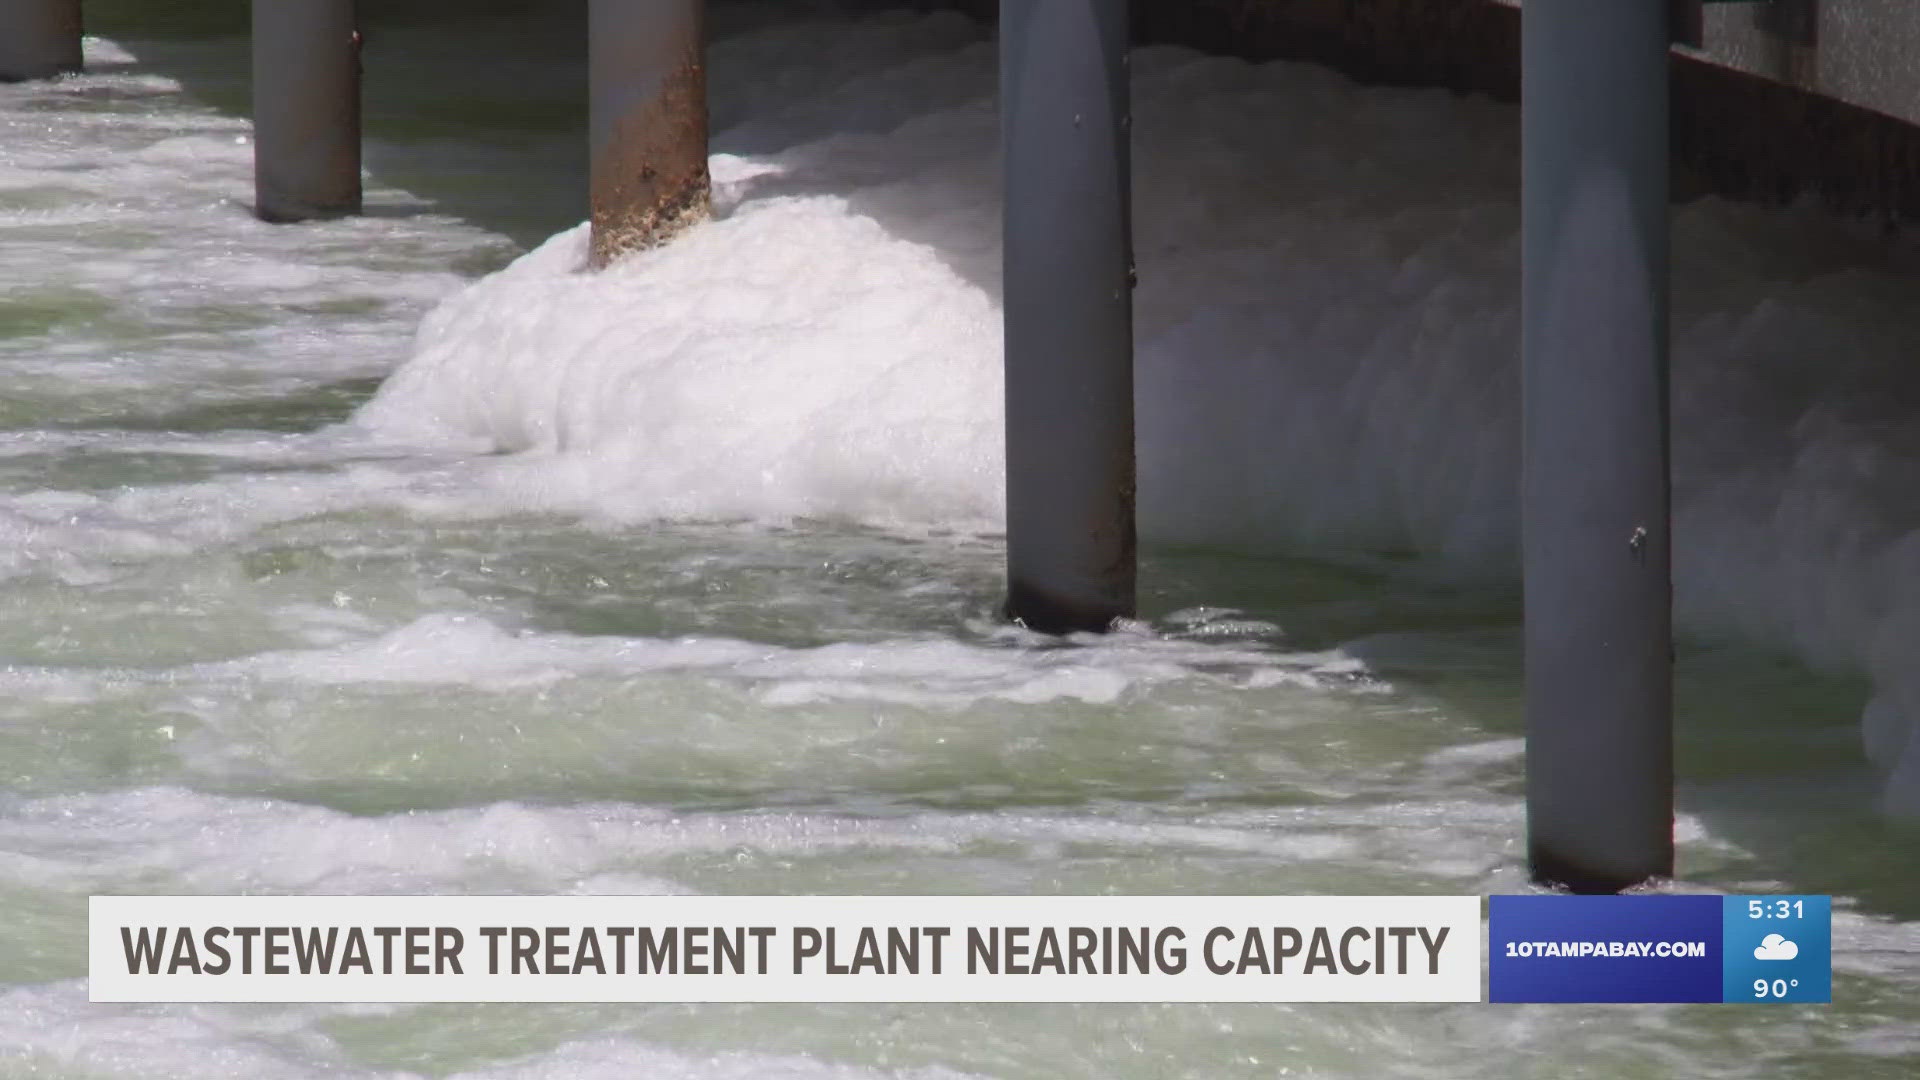 The city of Tampa will temporarily divert the wastewater flow while the county works with developers to manage the flow.